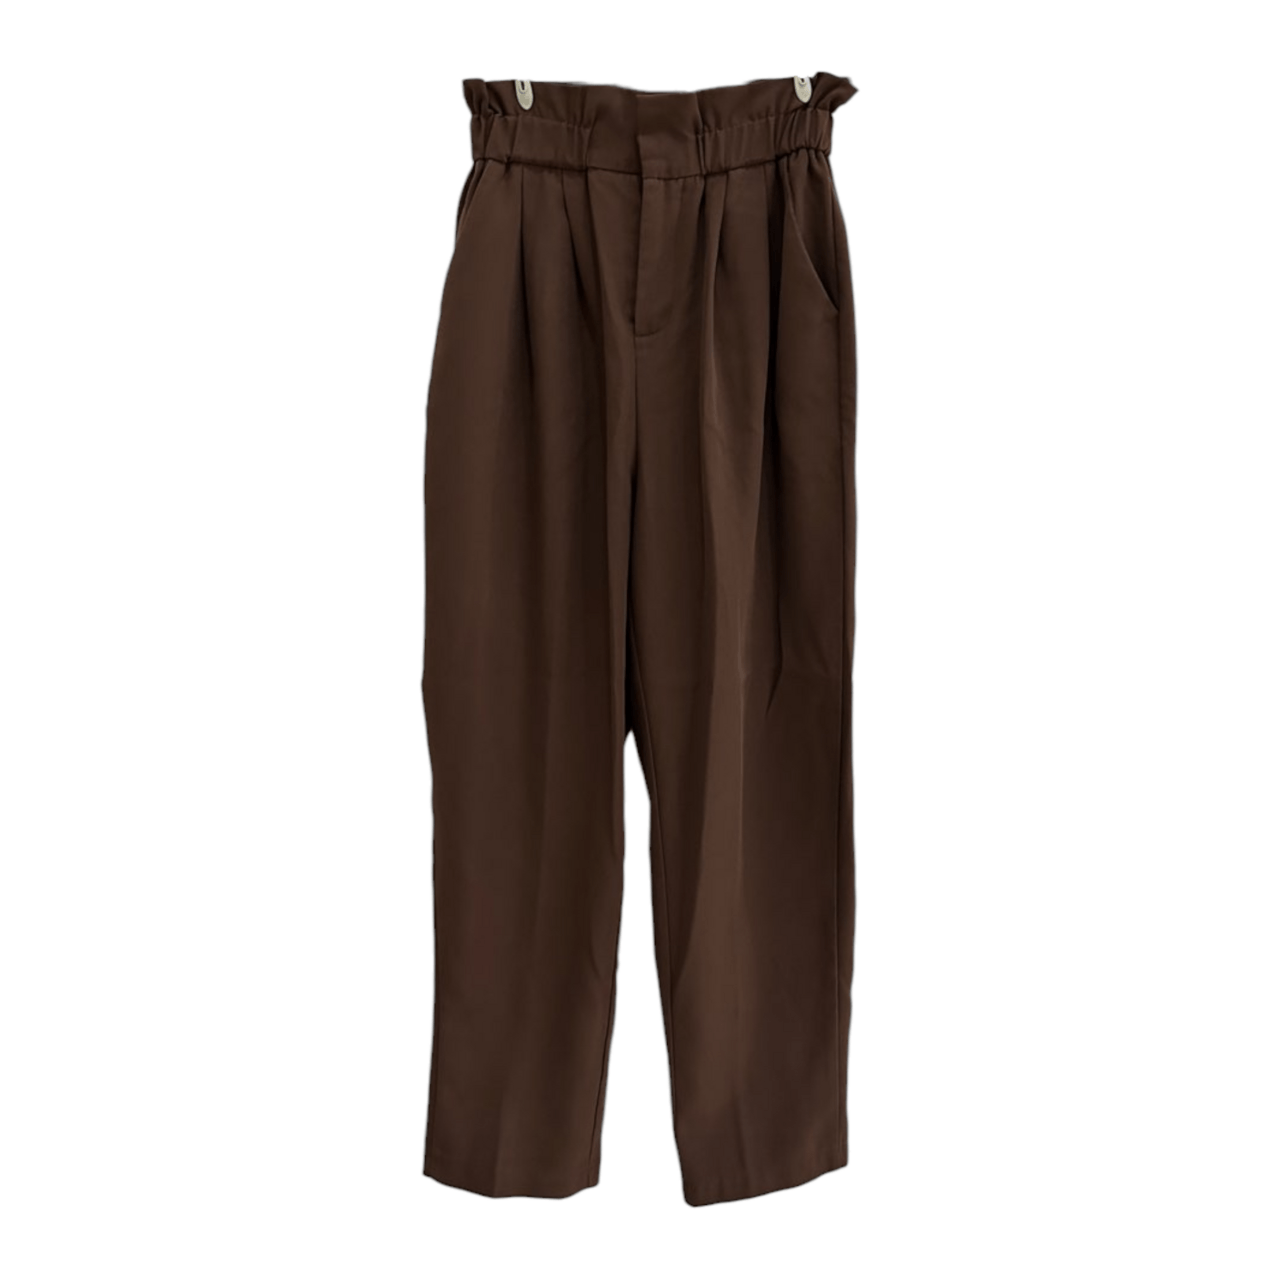 The Editor's Market Brown Long Pants